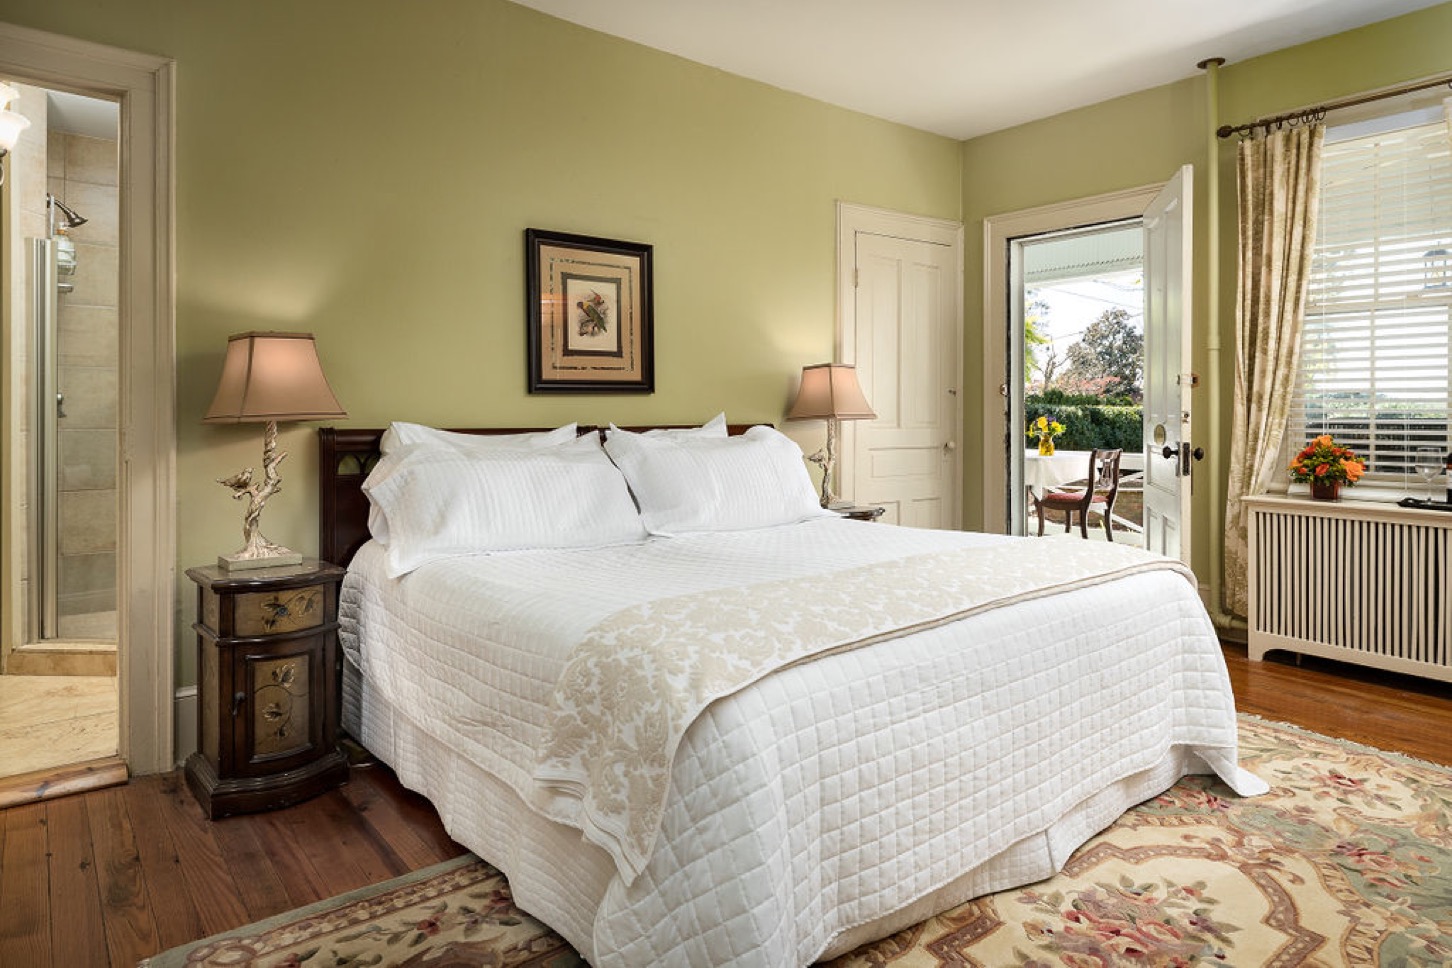 The Lightfoot Room at our romantic Virginia bed and breakfast